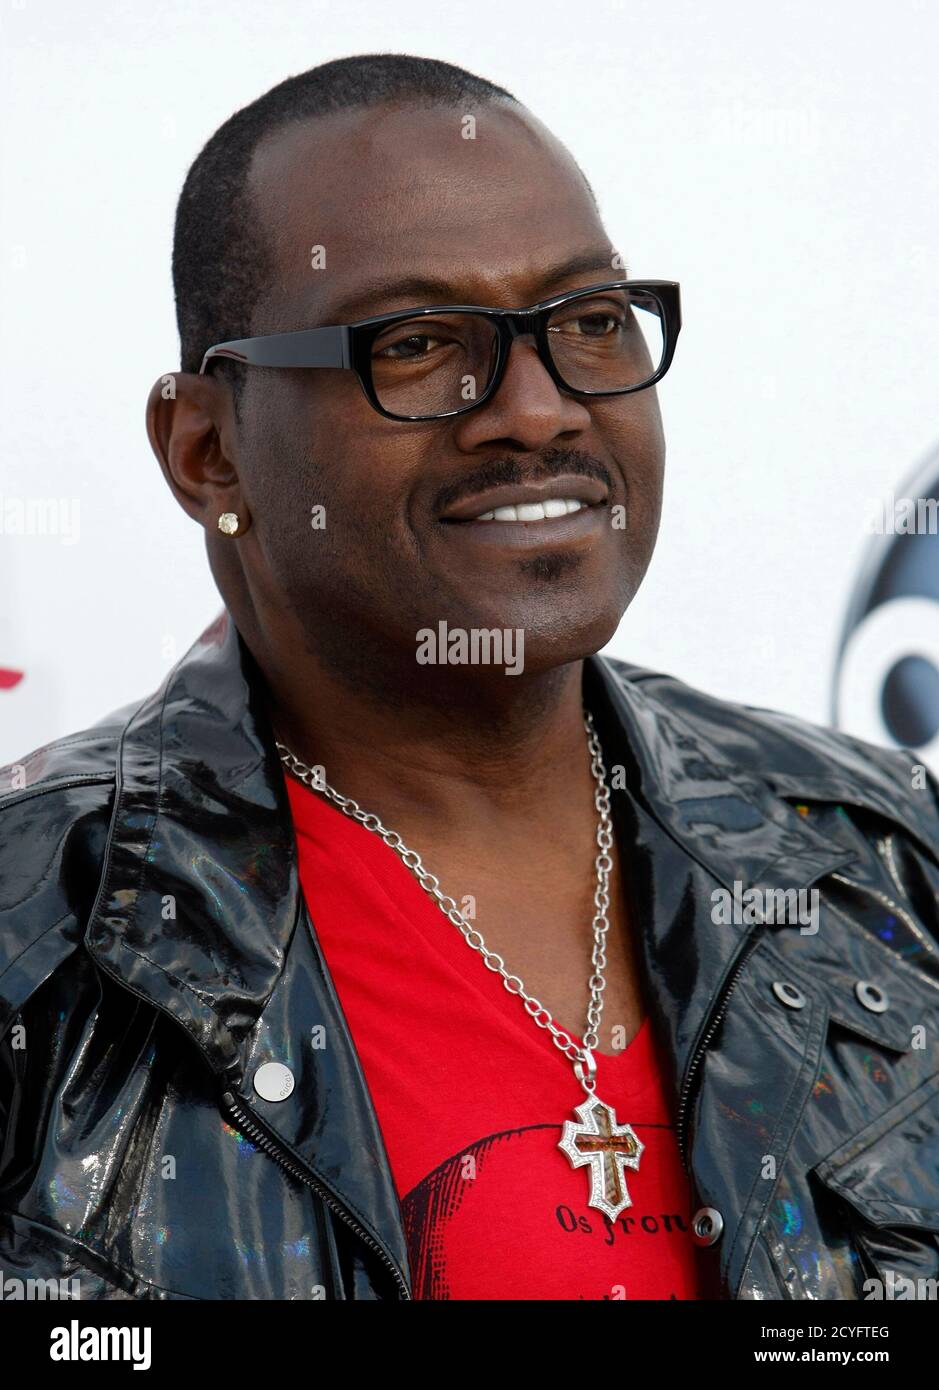 'American Idol' judge Randy Jackson arrives at the 2011 Billboard Music Awards show in Las Vegas May 22, 2011. REUTERS/Steve Marcus (UNITED STATES - Tags: ENTERTAINMENT) Stock Photo